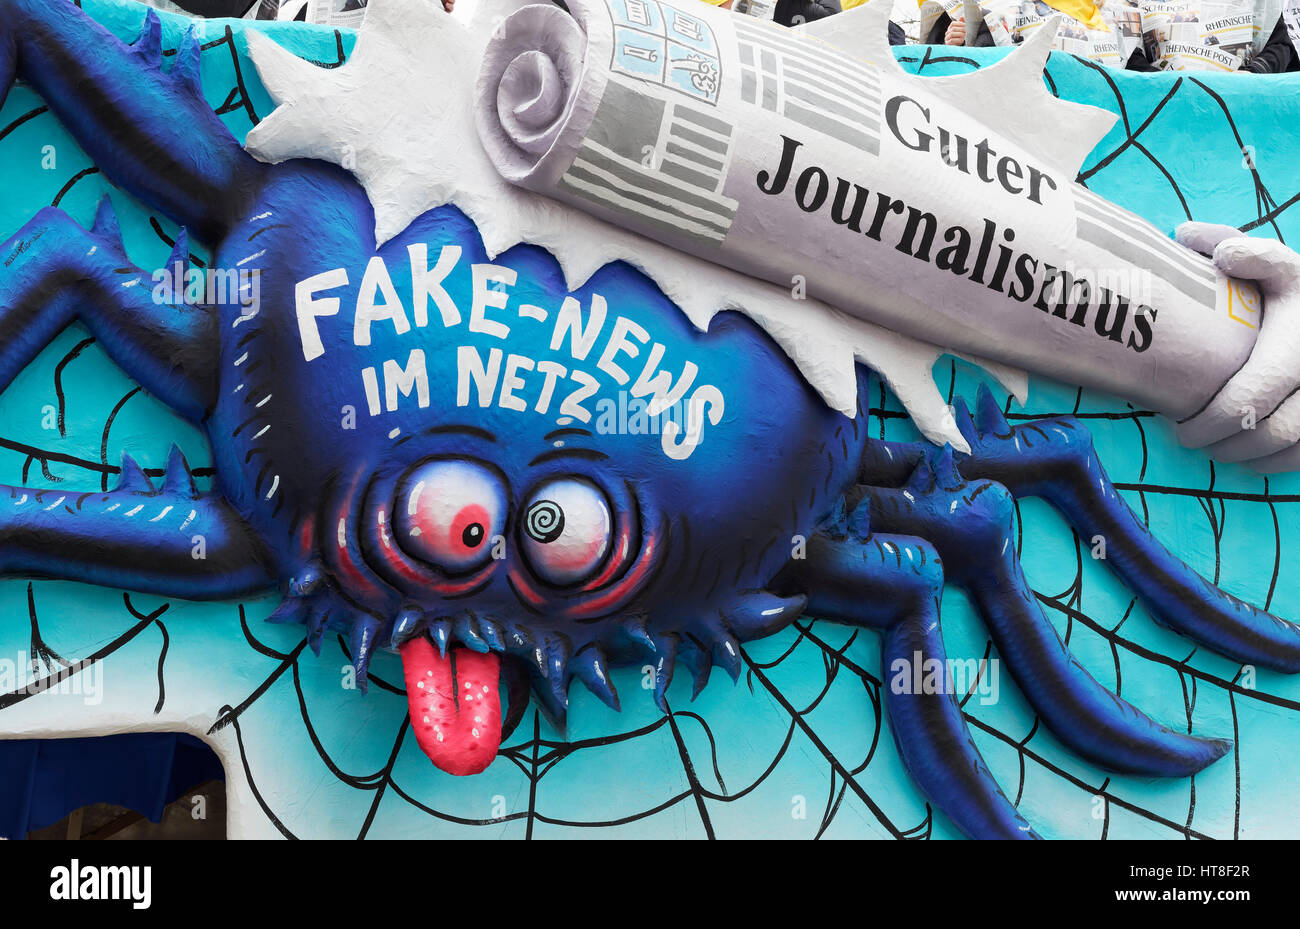 Spider in the web, good journalism beating Fake News, paper mache figure, political cartoon, motto Cart Carnival Monday Stock Photo